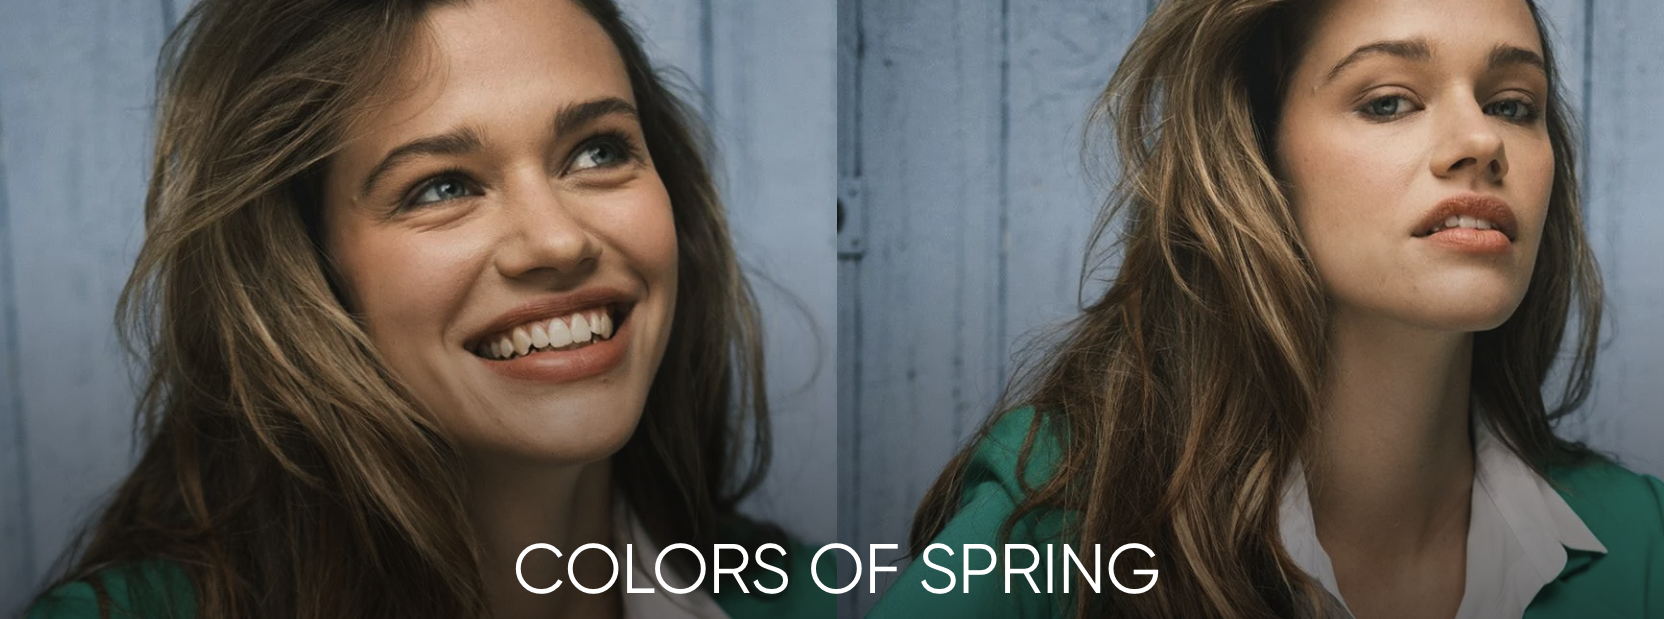 Colors of spring hos VIC